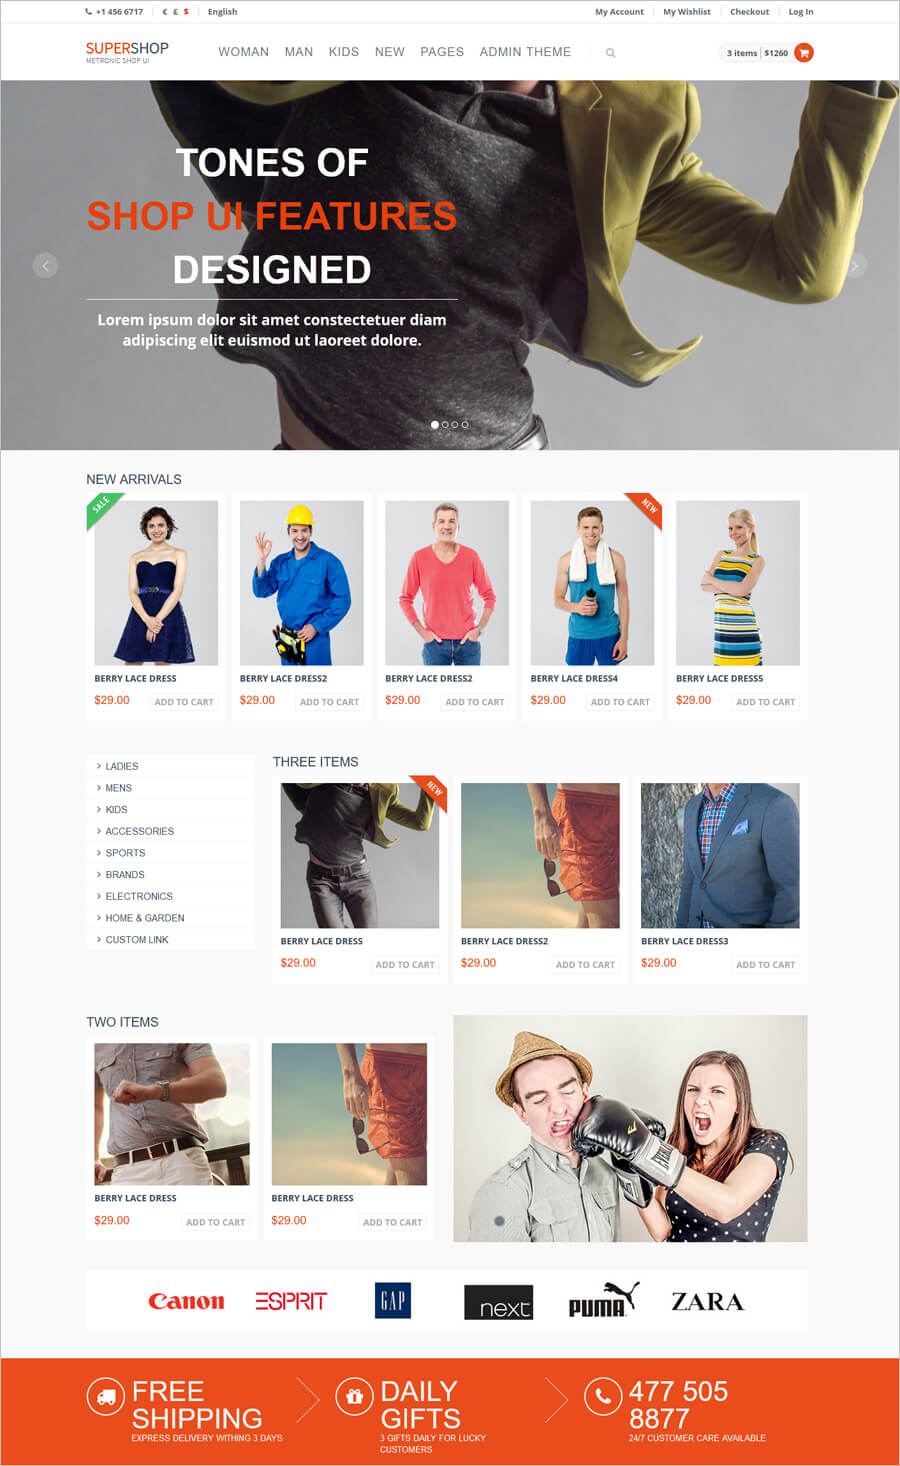 SuperShop - Free eCommerce Bootstrap Template